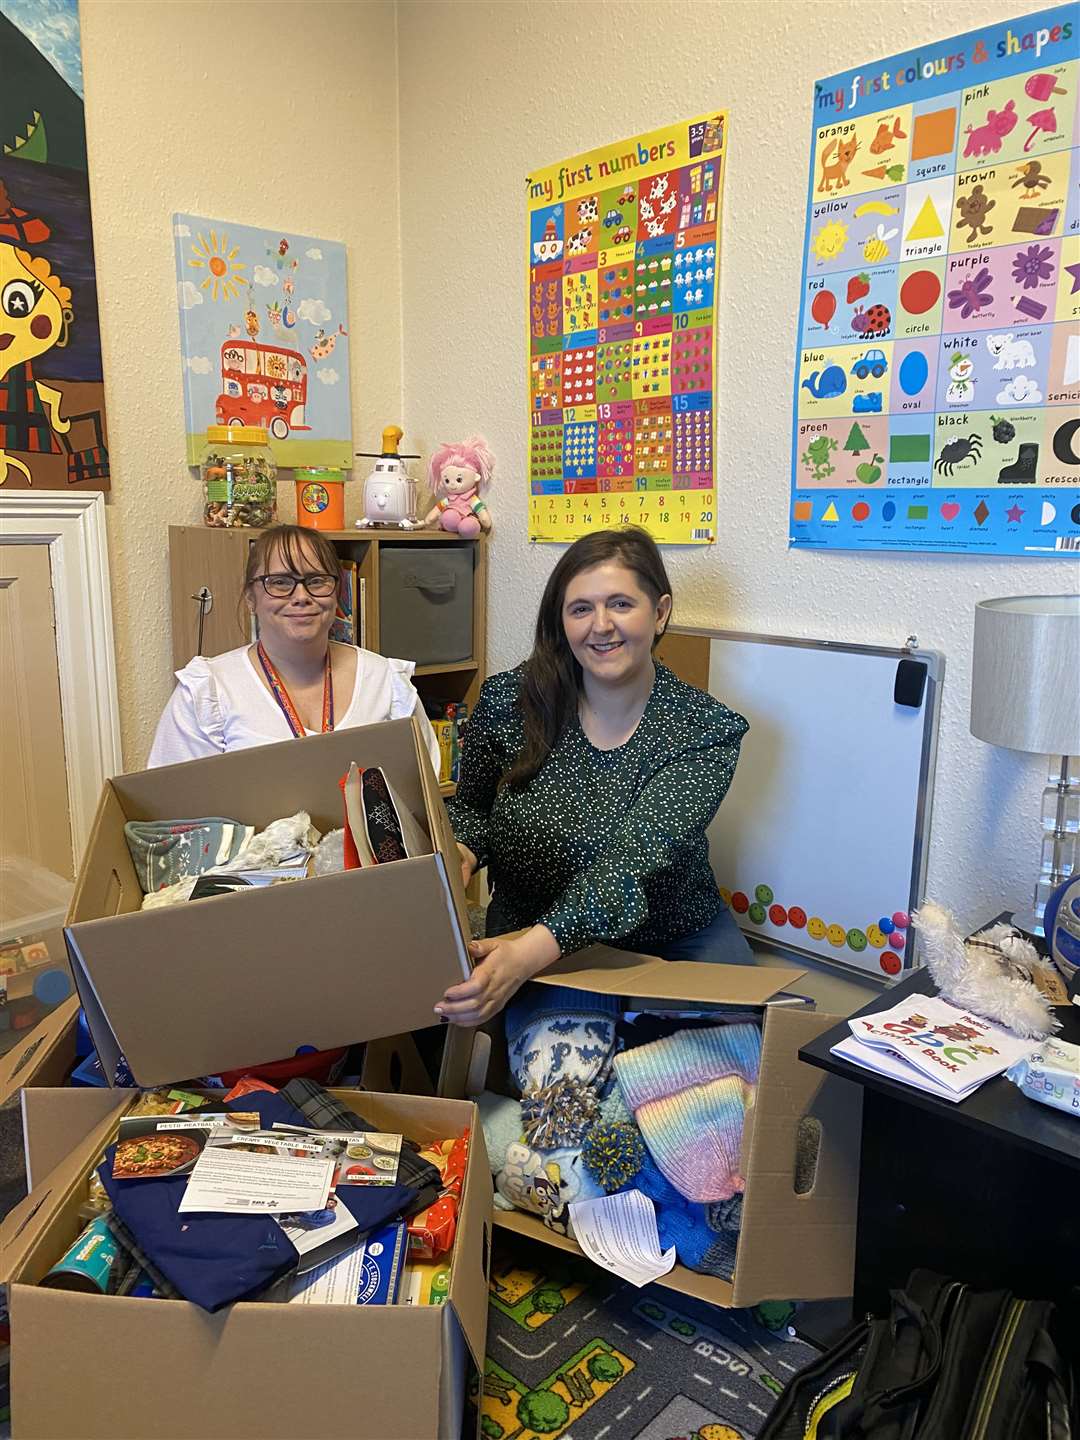 Kerry O’Hagan (right), head of offender outcomes at HMP Inverness was key in organising the warm boxes initiative, with Lorna Pattie, service co-ordinator for HMP Inverness visitor centre (who also works for Action for Children).